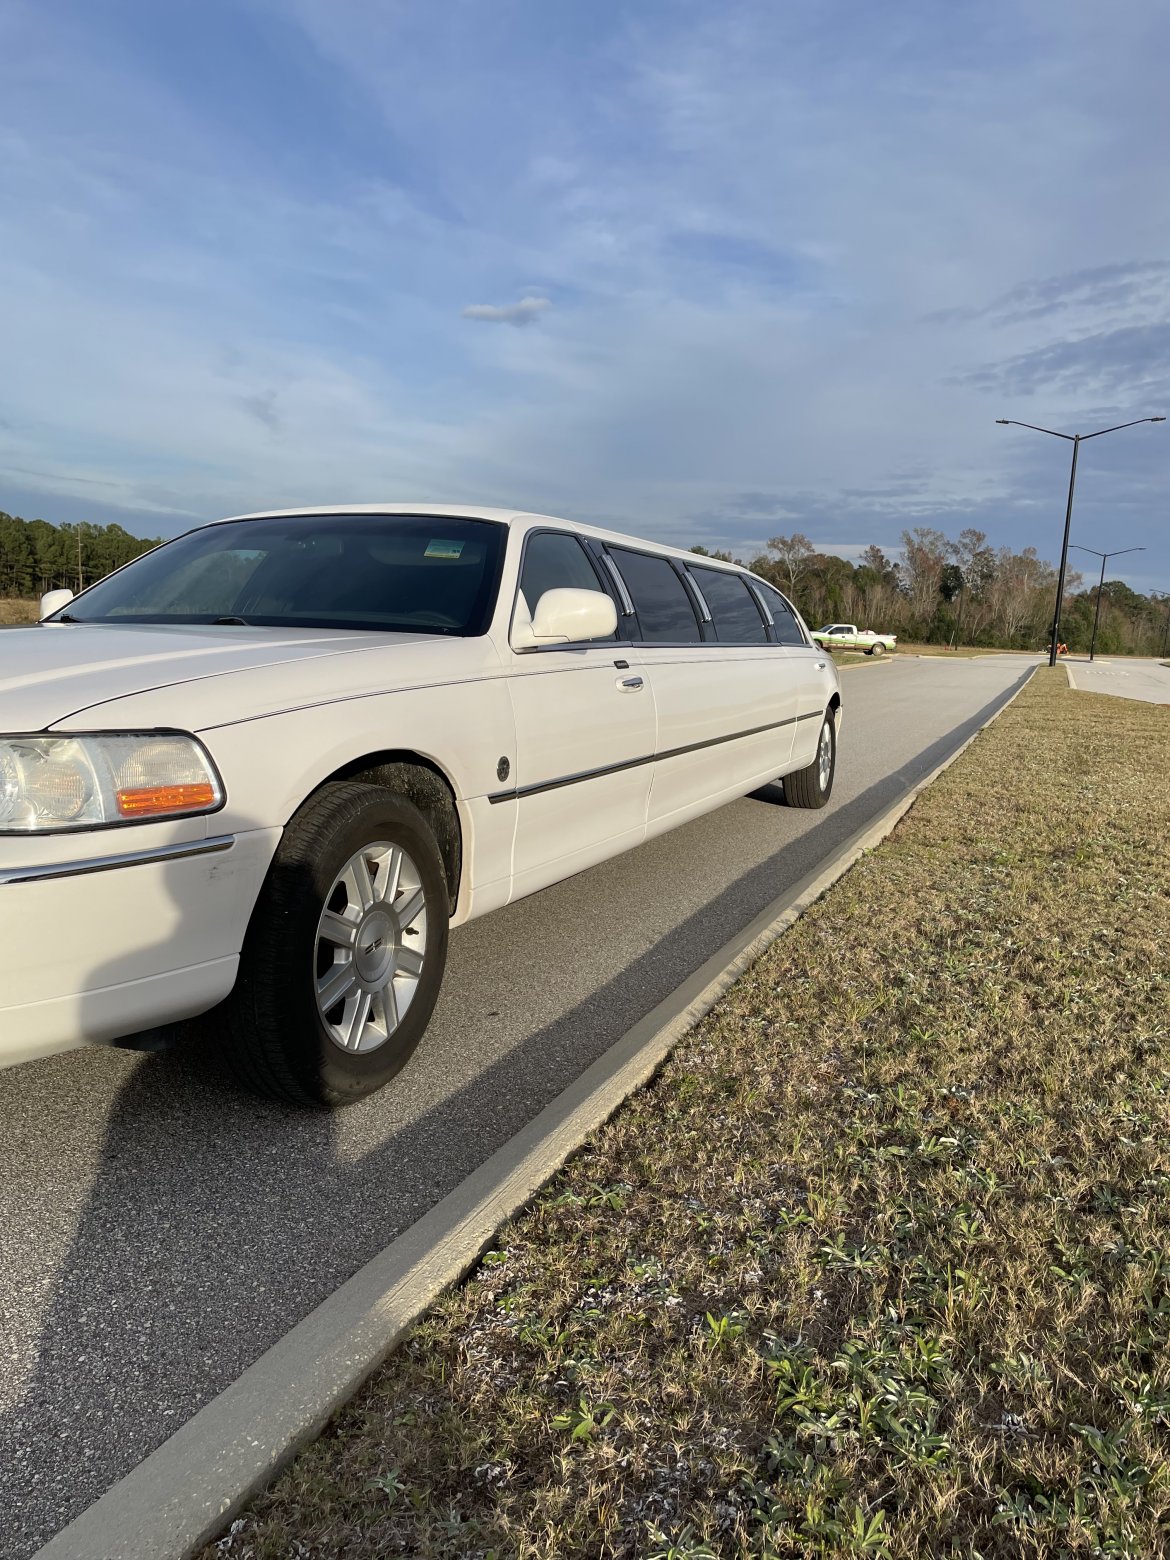 Limousine for sale: 2008 Lincoln Town Car by Federal